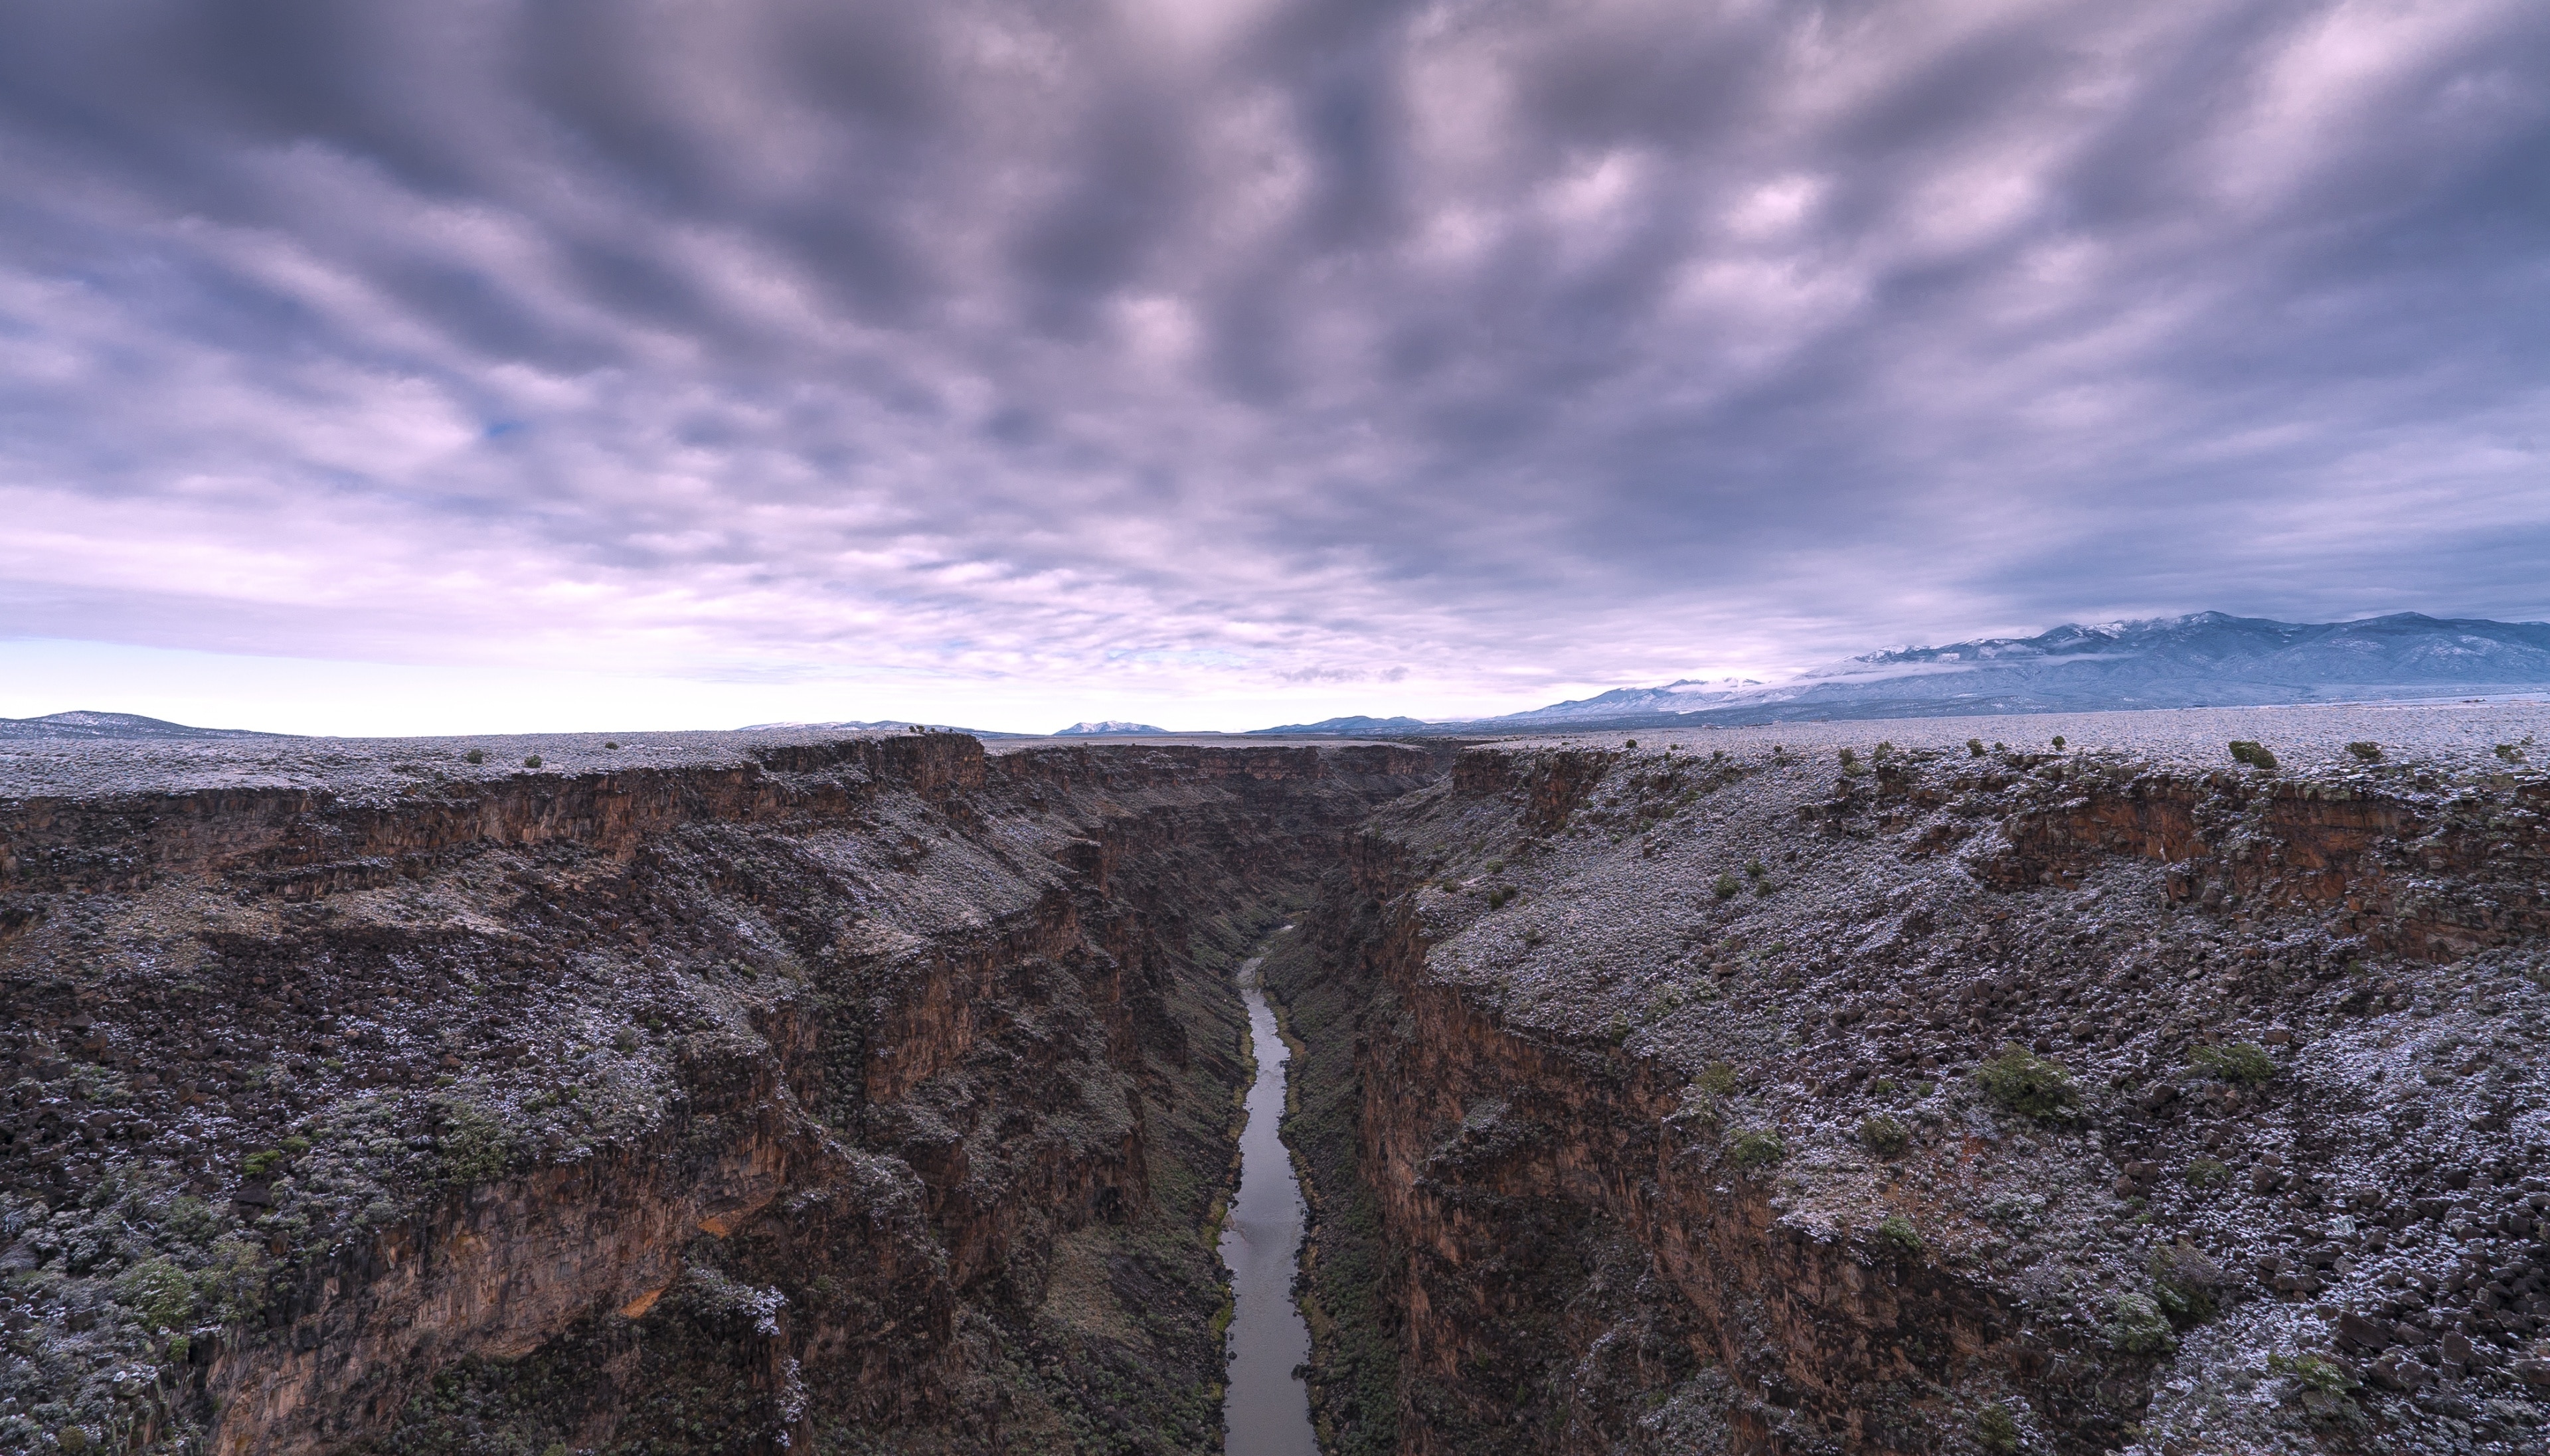 Just outside of Taos, New Mexico sits the Rio Grande Gorge. The bridge stands a staggering 656' above a seemingly small ribbon of water below. Walkways on either side provide incredible views up and down the gorge. #ADVENTURE